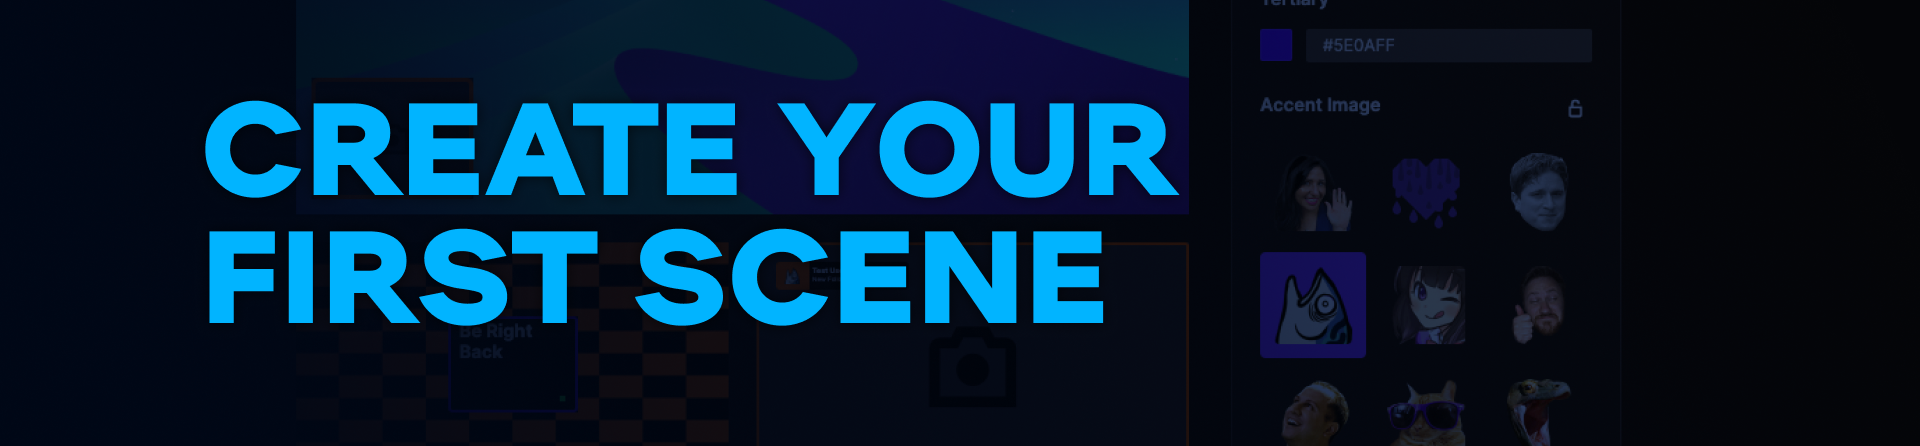 Create Your first scene!